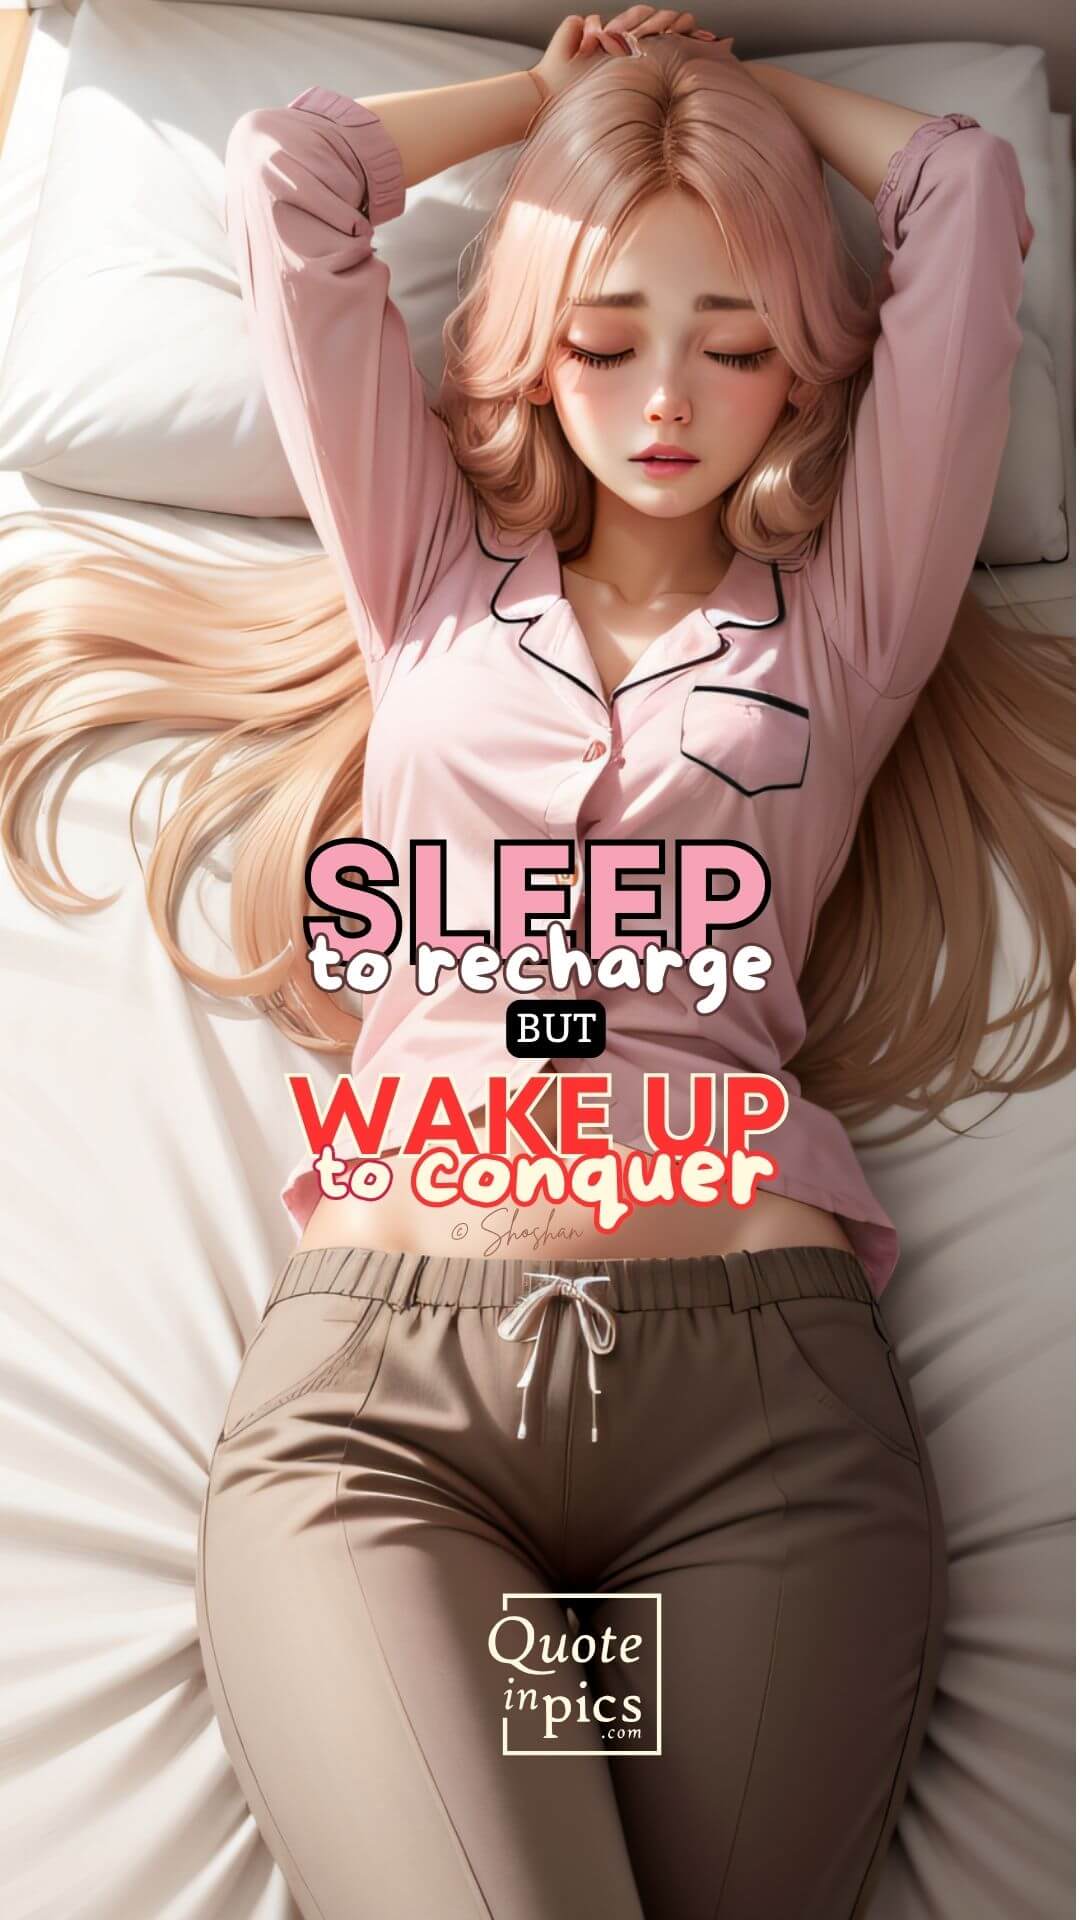 Sleep to recharge, but wake up to conquer.